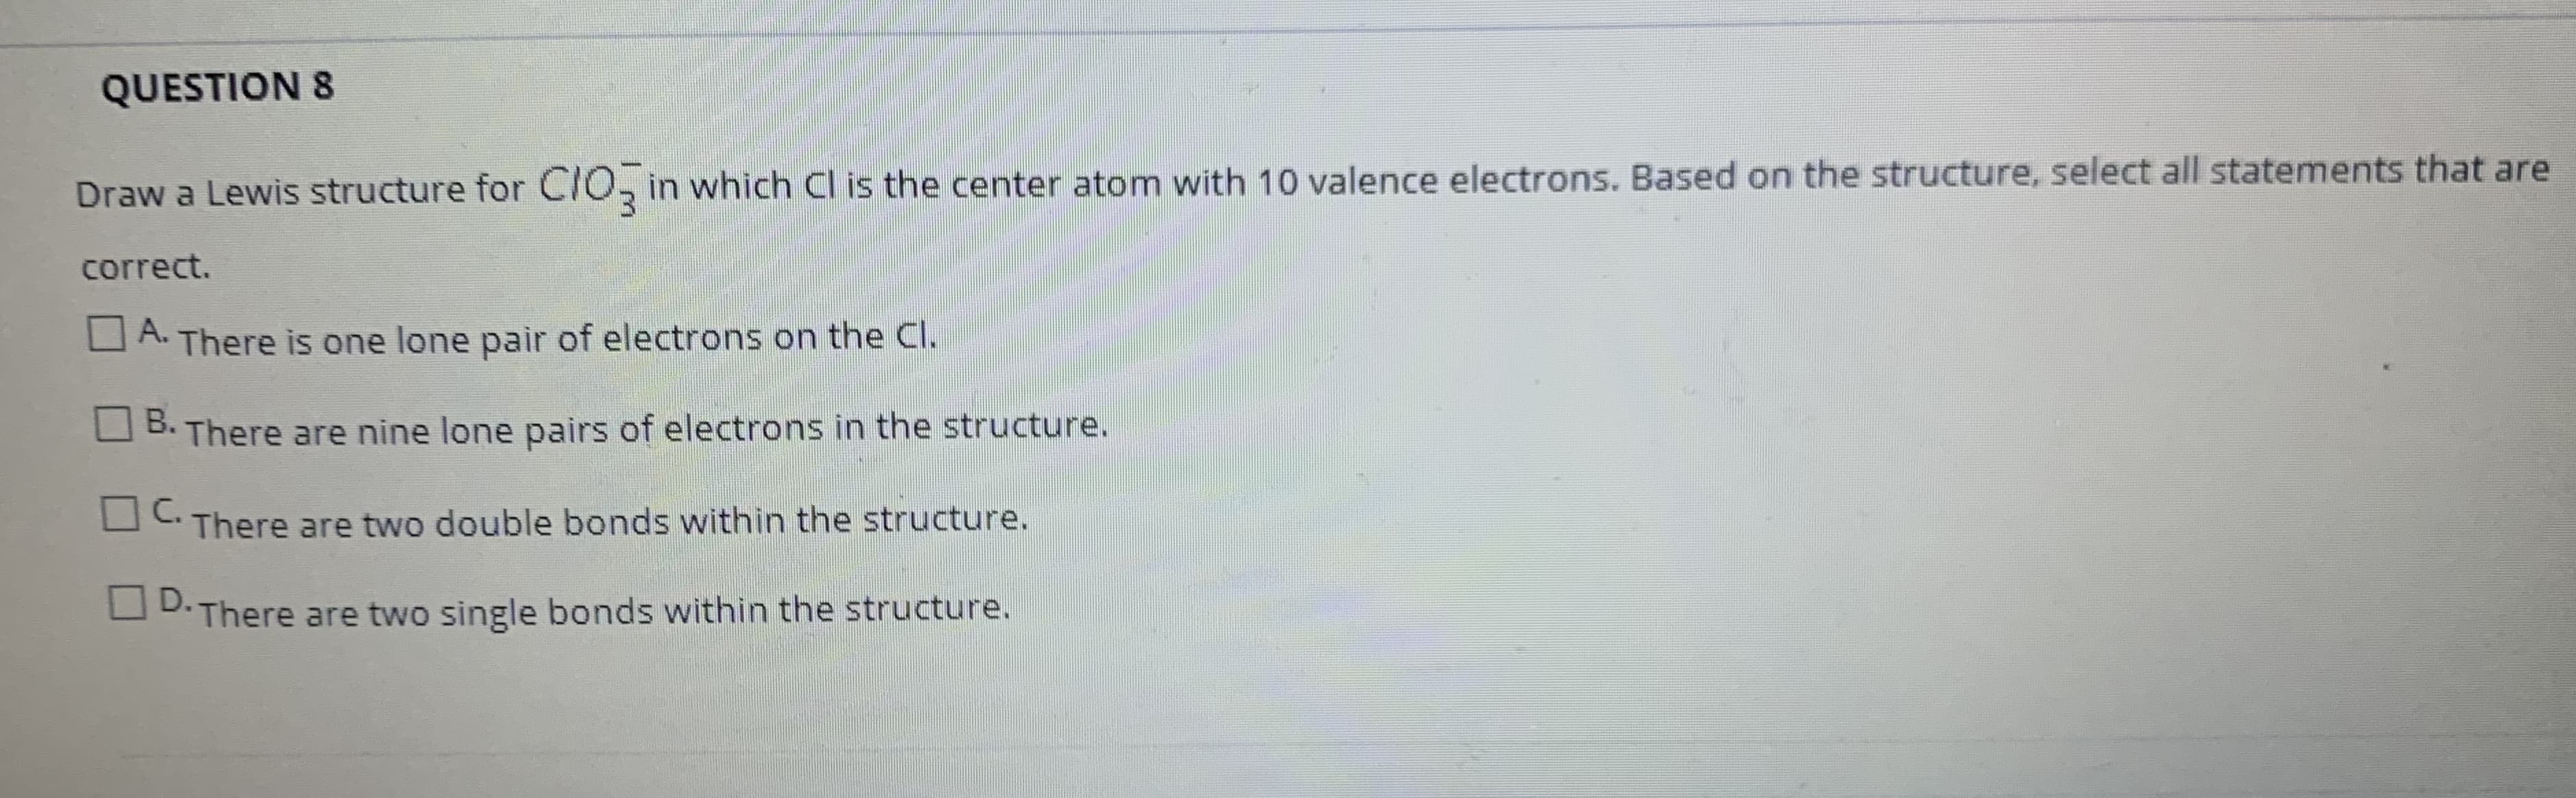 Draw a Lewis structure for CTO, in which Cl is the center atom with 10 valence electrons. Based on the structure, select all statements that are
correct.
